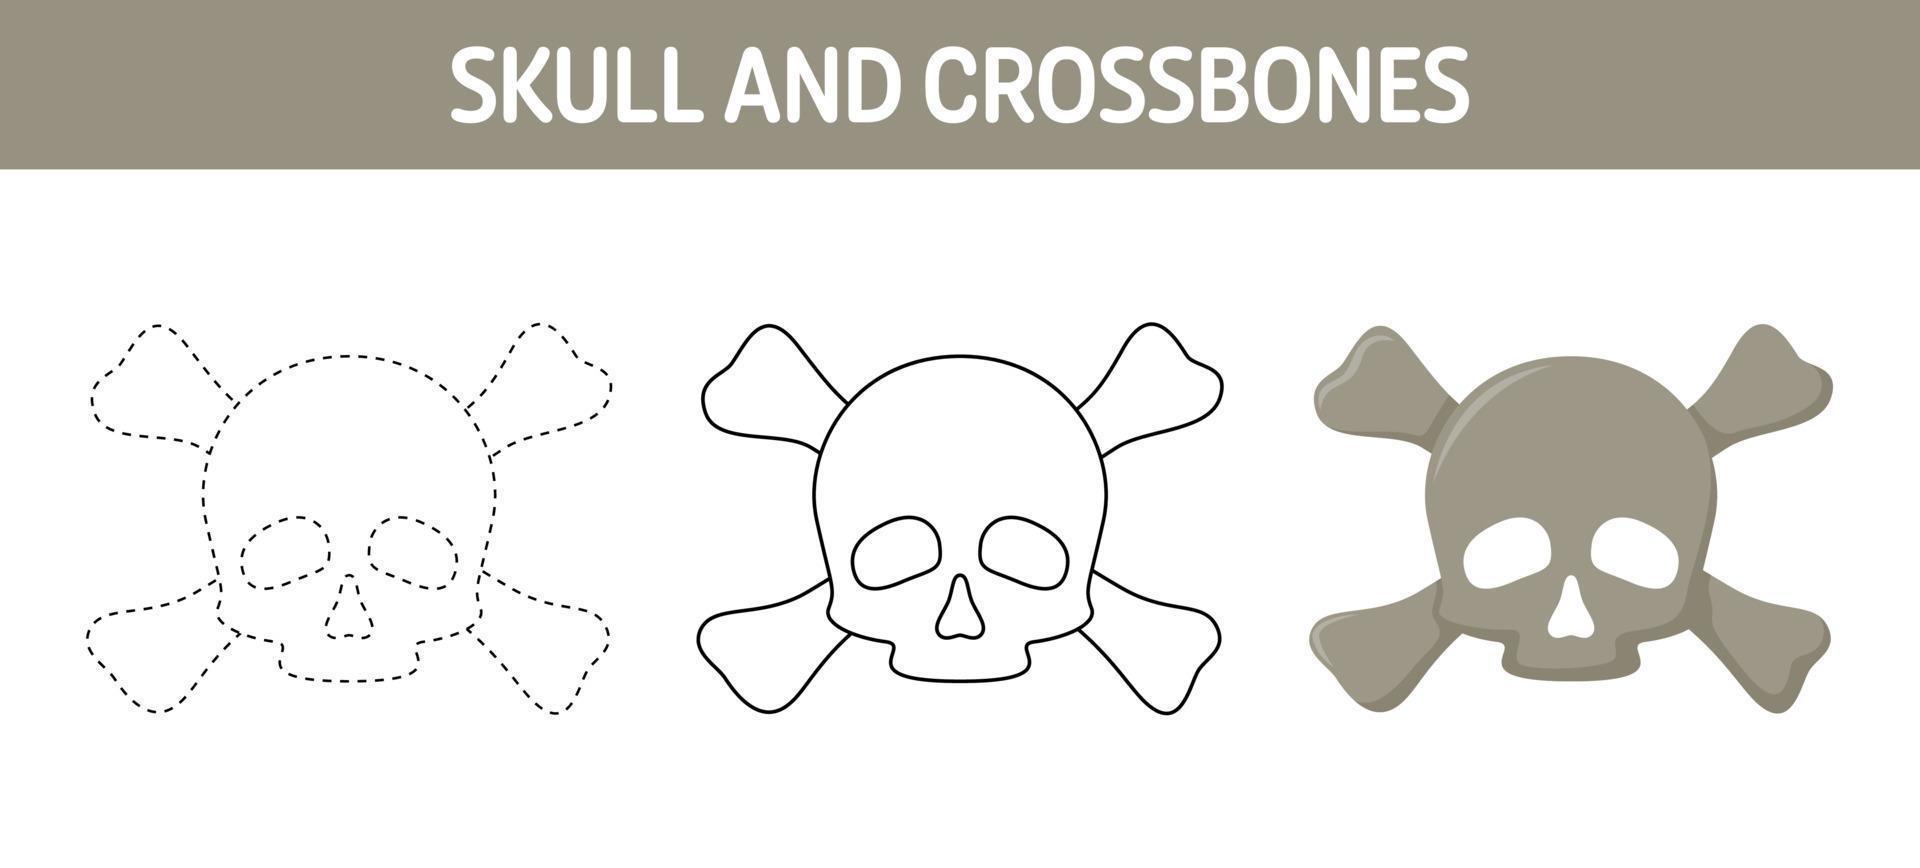 Skull And Crossbones tracing and coloring worksheet for kids vector